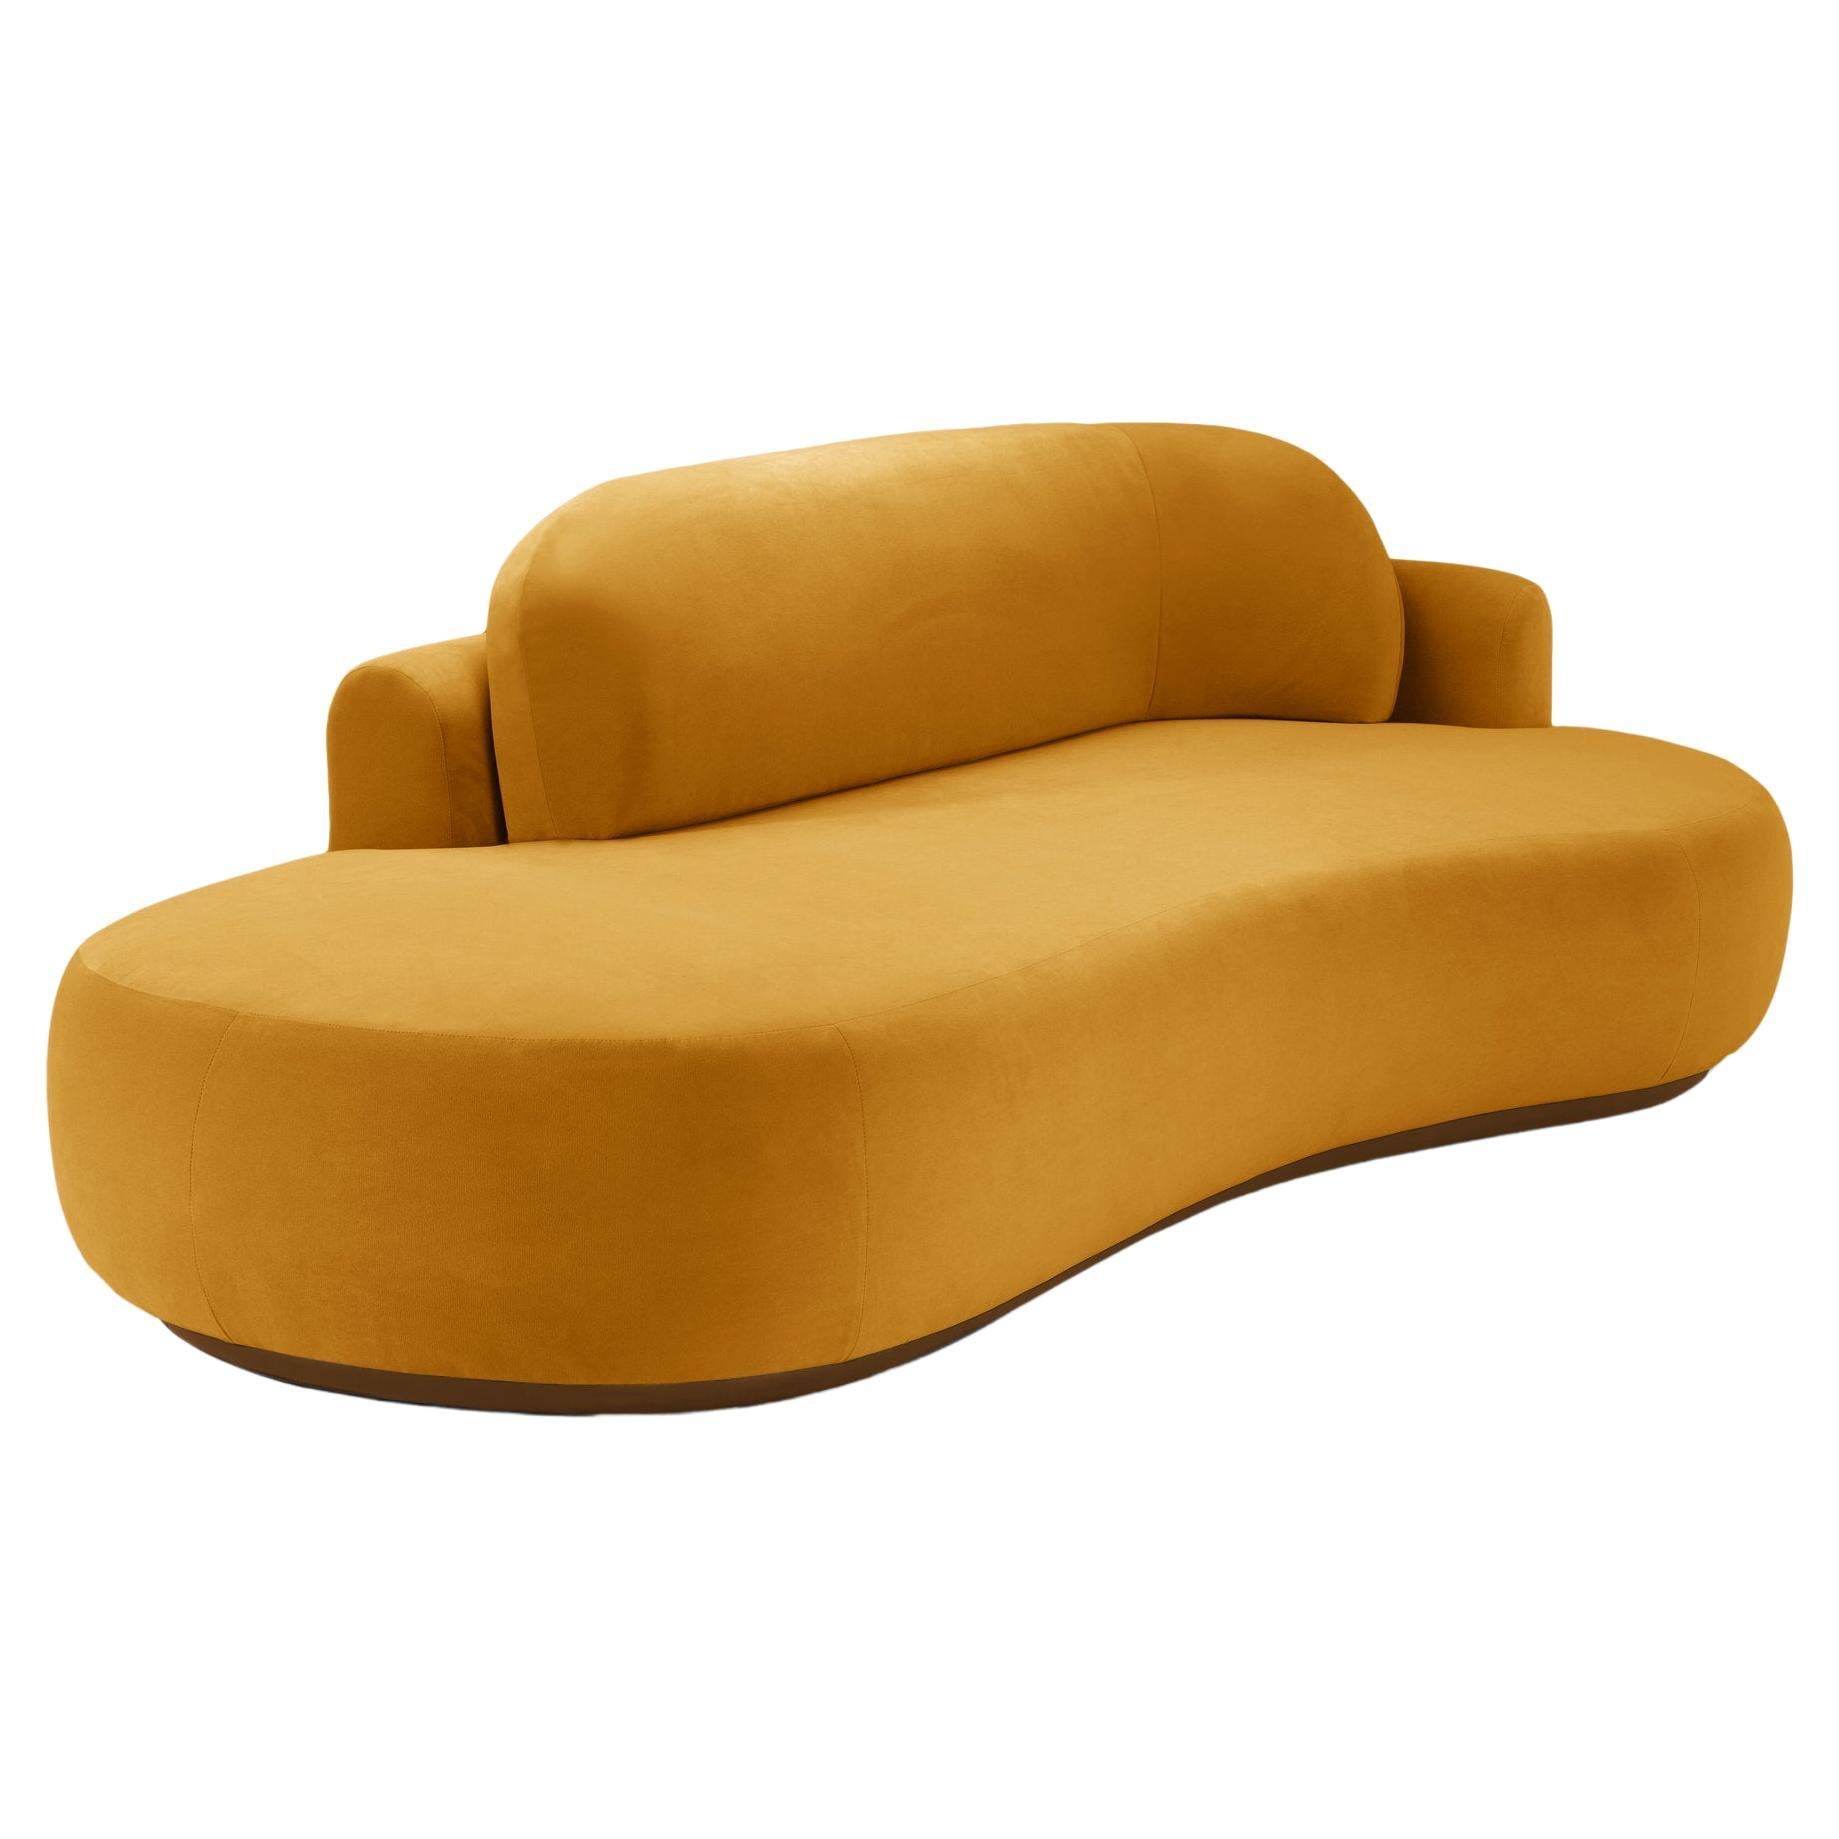 Naked Curved Sofa Single with Beech Ash-056-1 and Corn